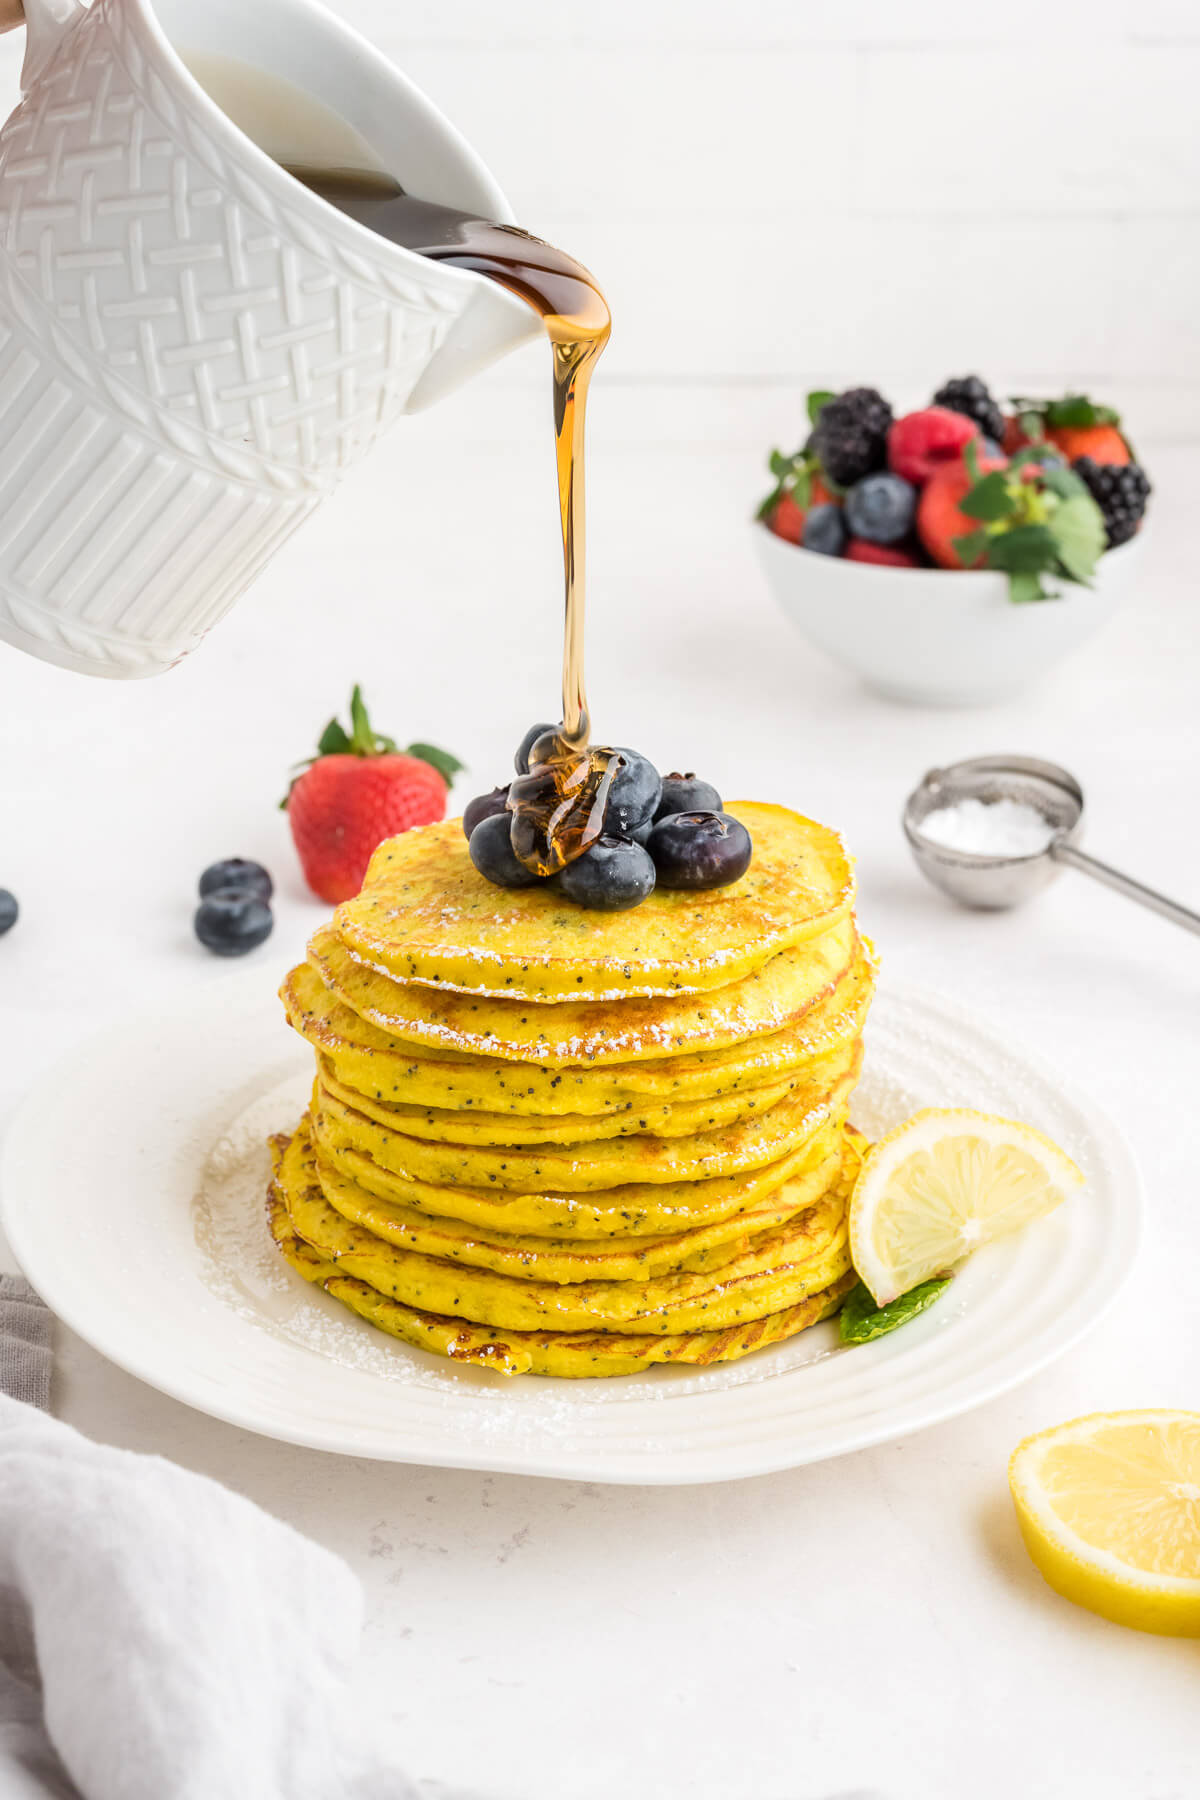 a pitcher of maple syrup being poured over a stack of lemon ricotta pancakes.